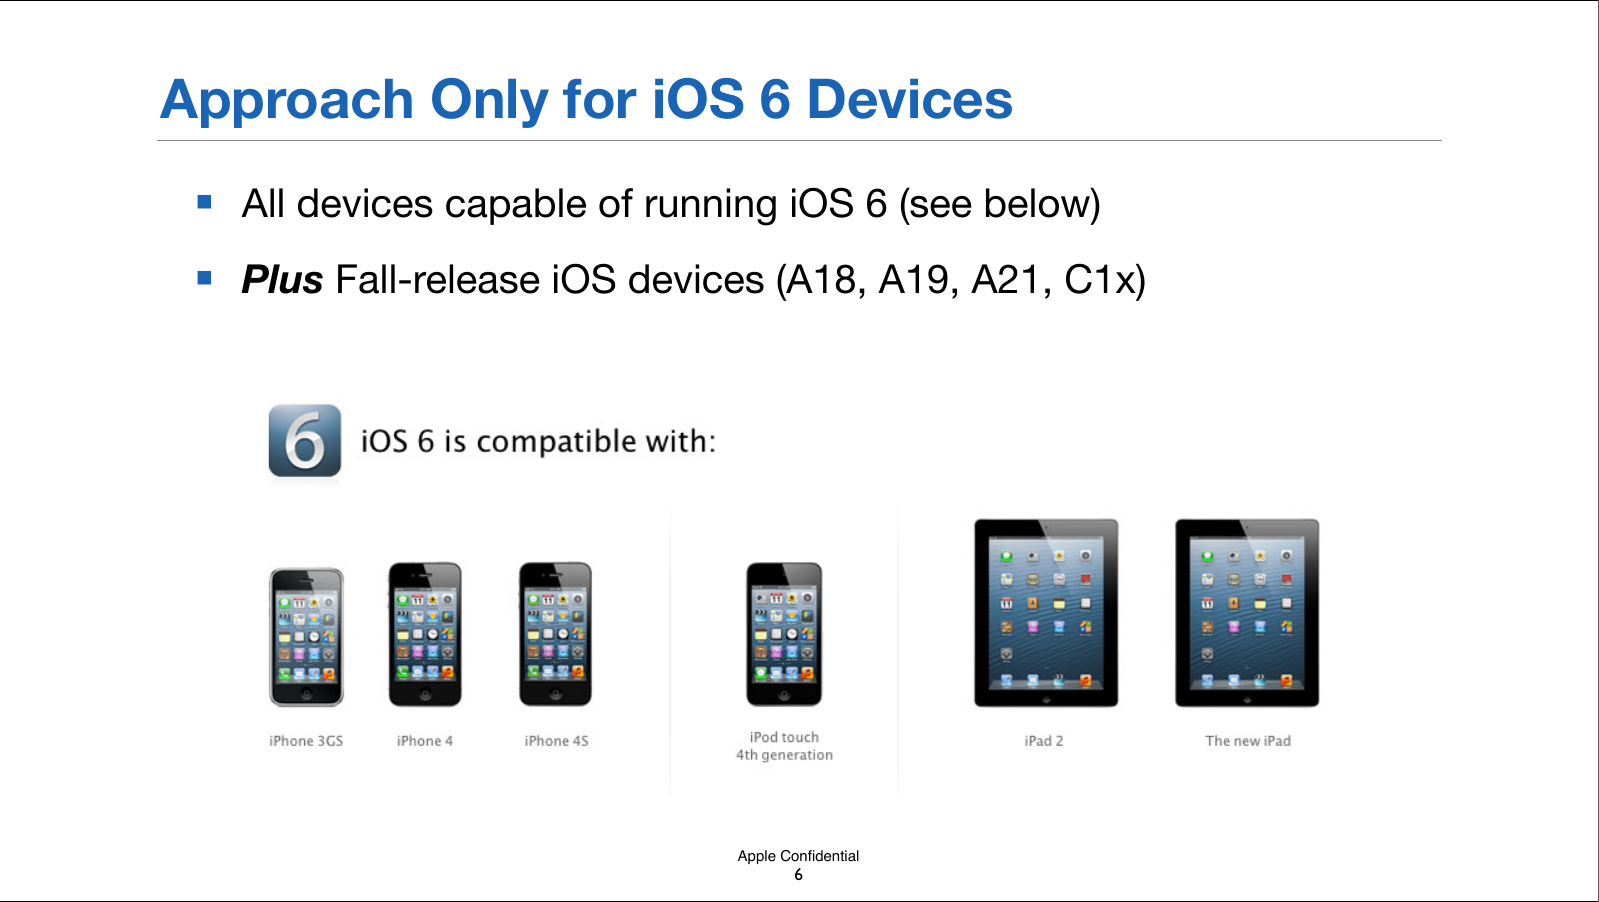 Apple ConﬁdentialApproach Only for iOS 6 Devices■All devices capable of running iOS 6 (see below)■Plus Fall-release iOS devices (A18, A19, A21, C1x)6